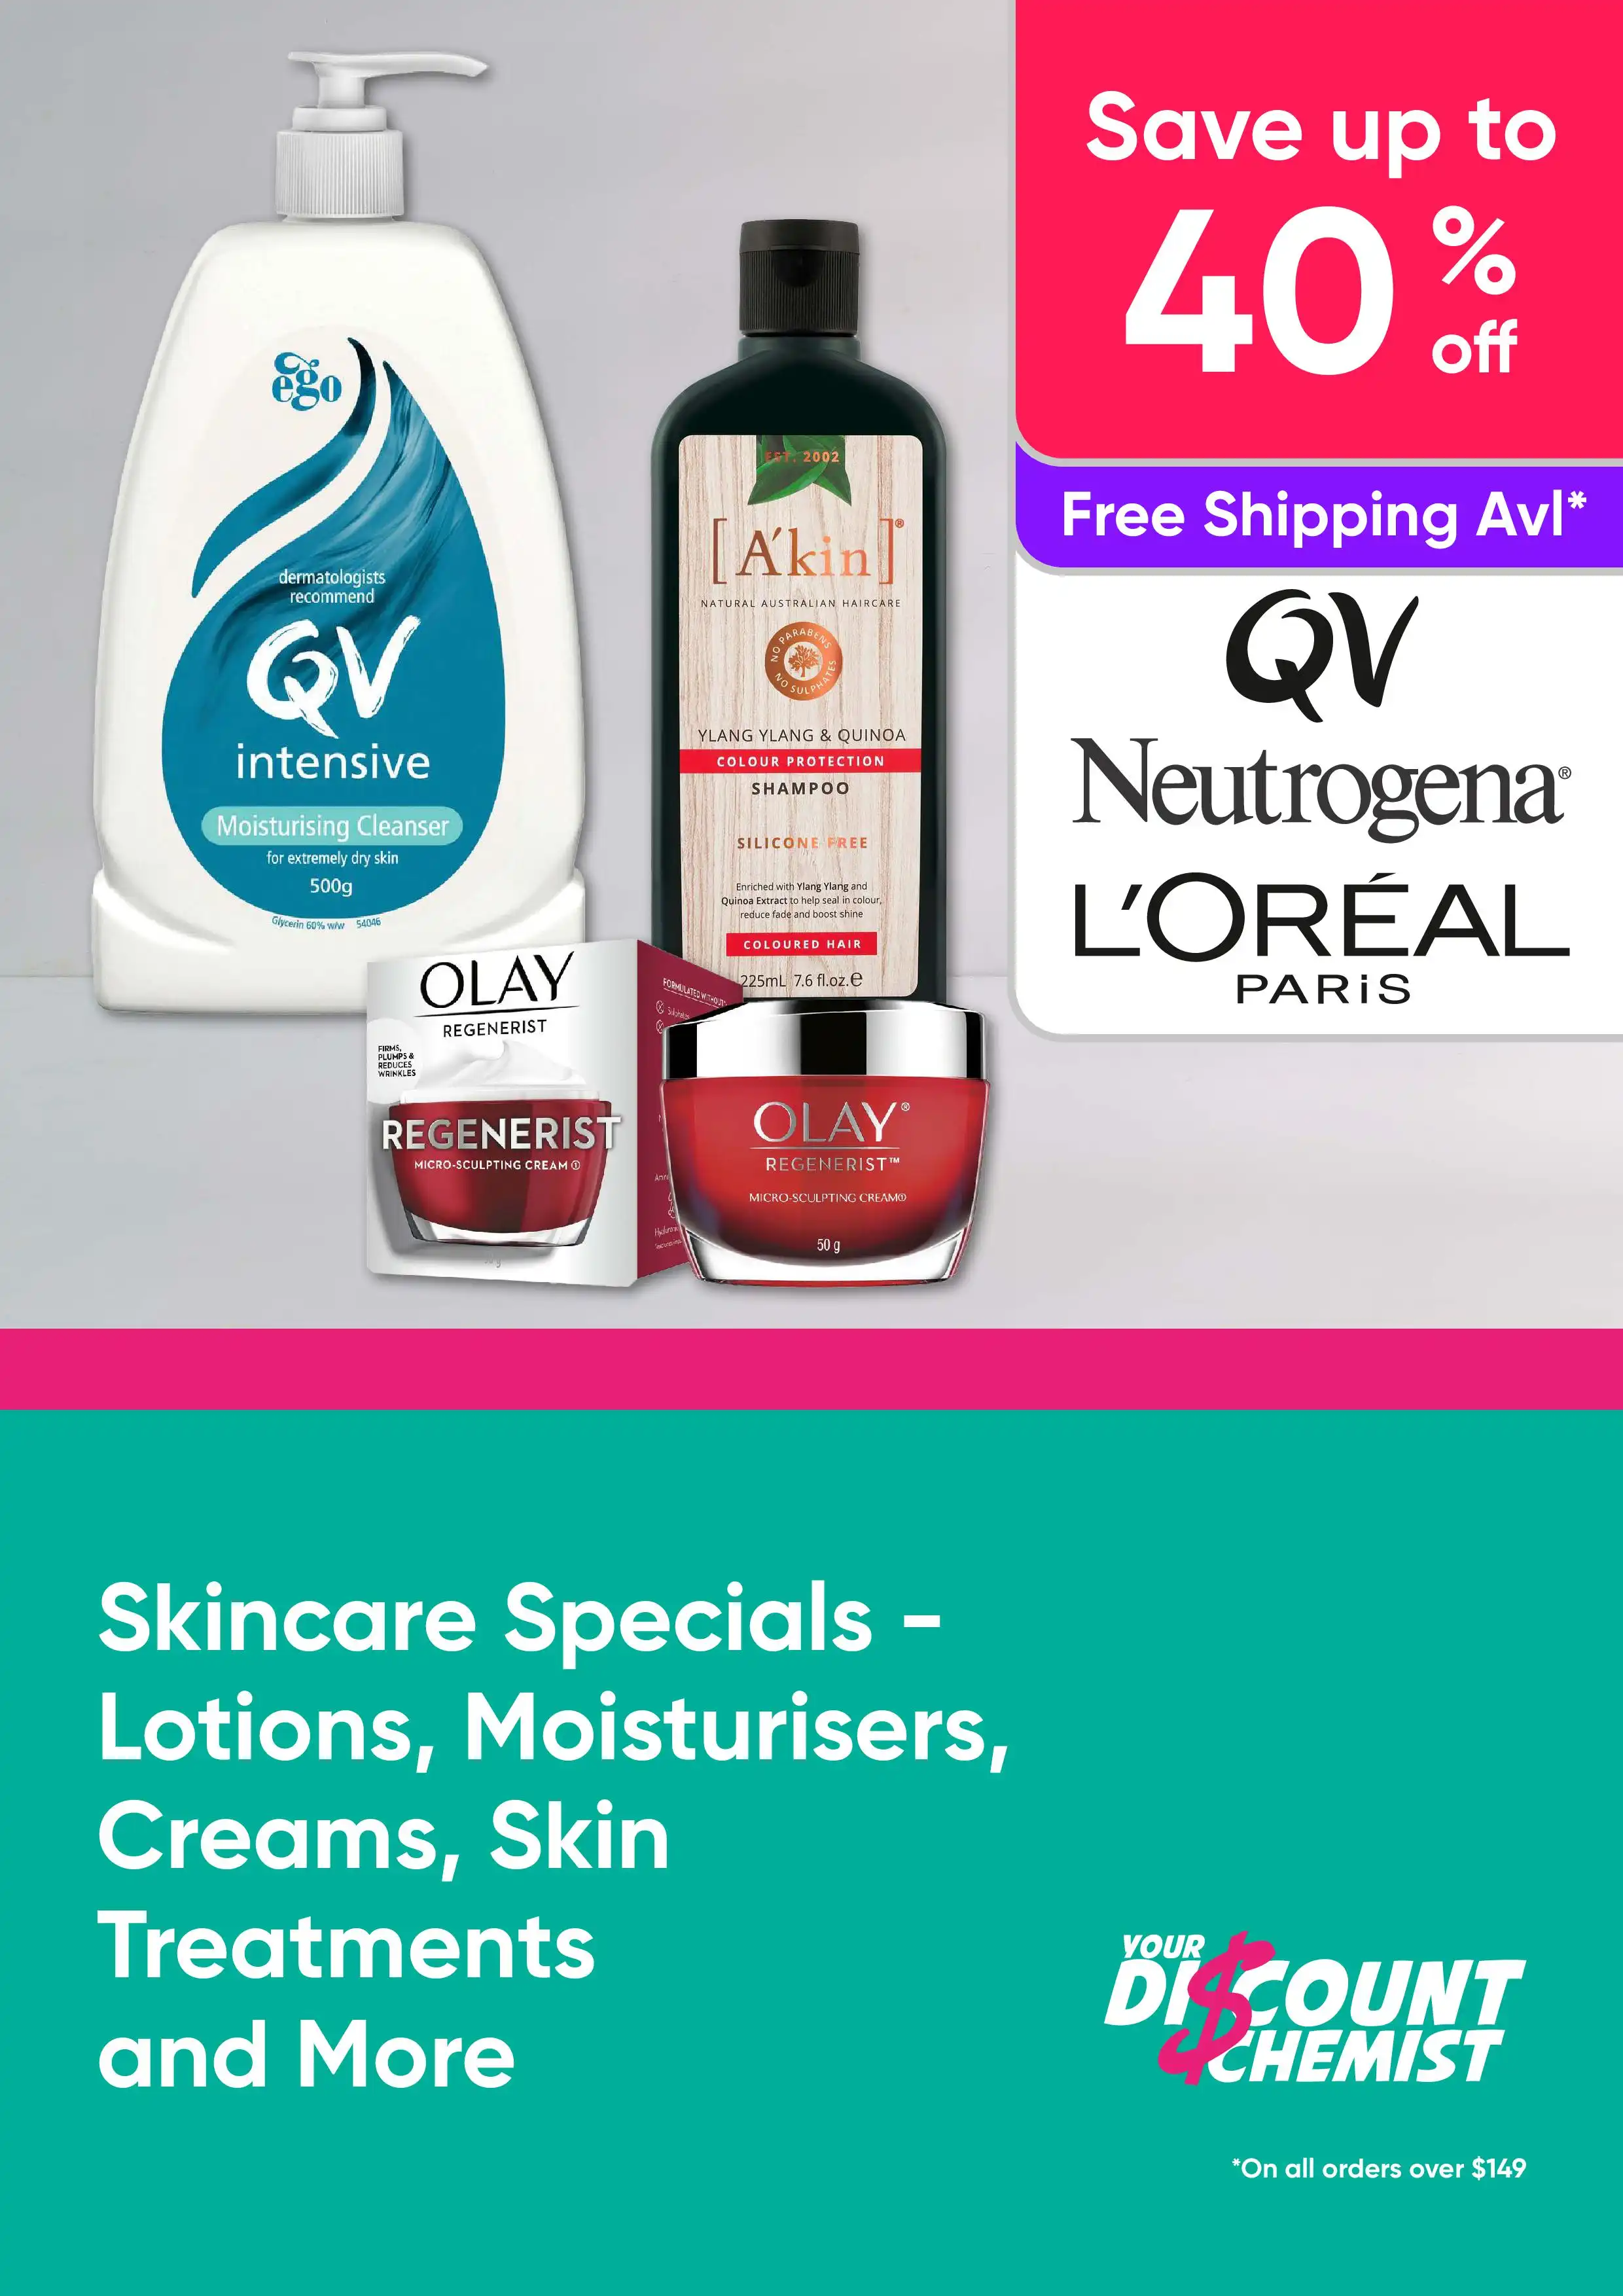 Shop Skincare Specials - Save up to 40% on Lotions, Moisturisers, Creams, Skin Treatments and More